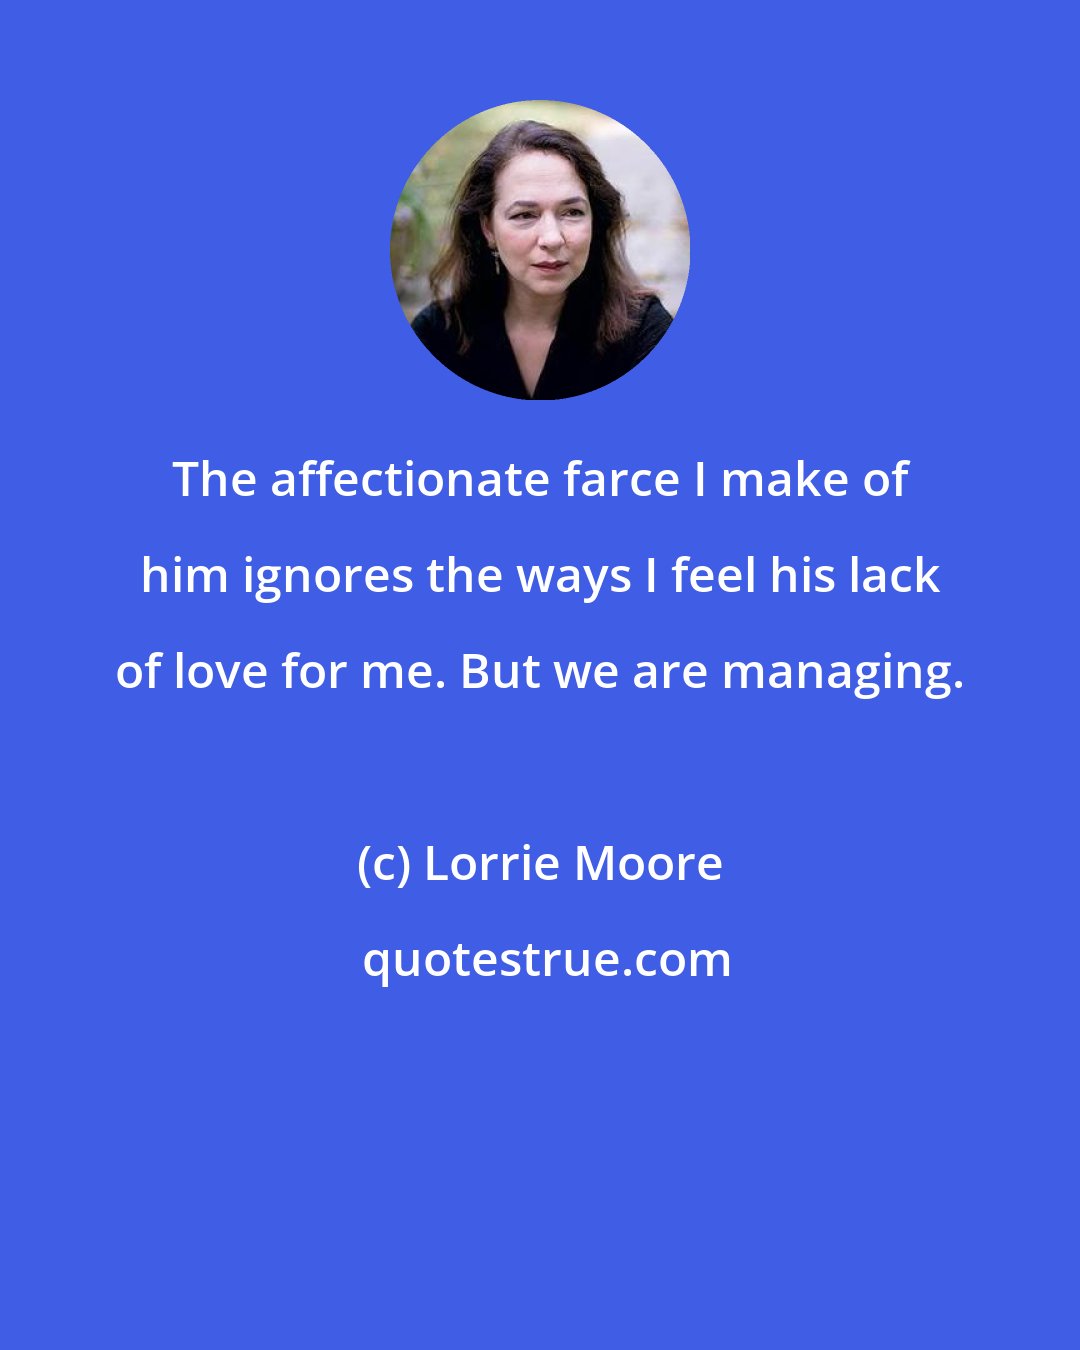 Lorrie Moore: The affectionate farce I make of him ignores the ways I feel his lack of love for me. But we are managing.